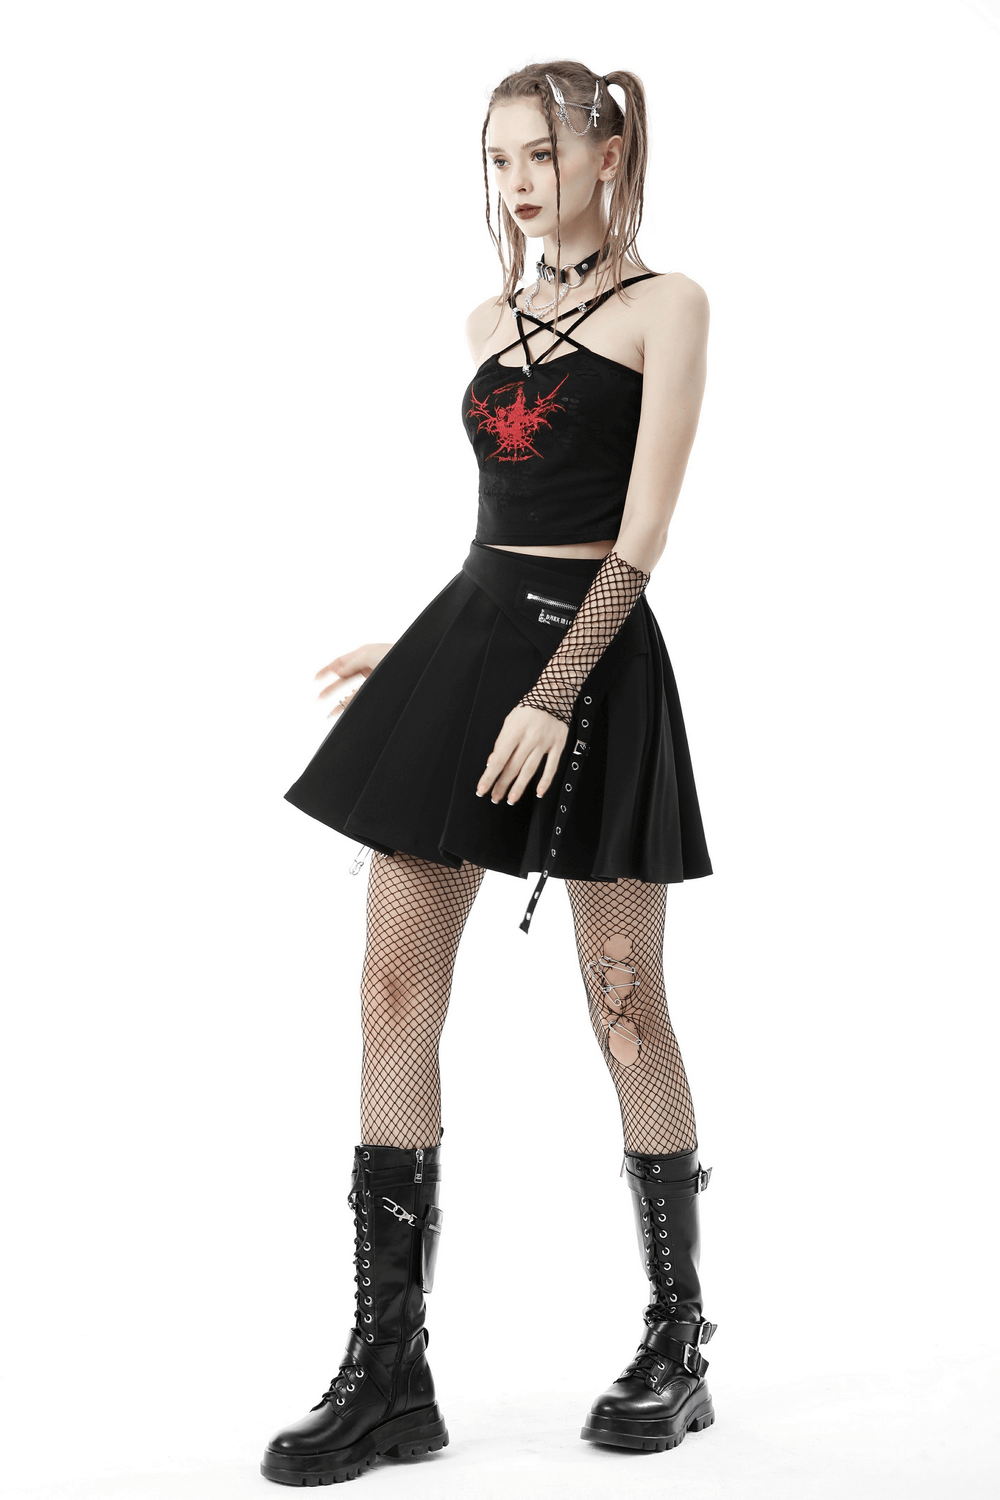 Edgy Gothic Black Crop Top with Red Print and Straps